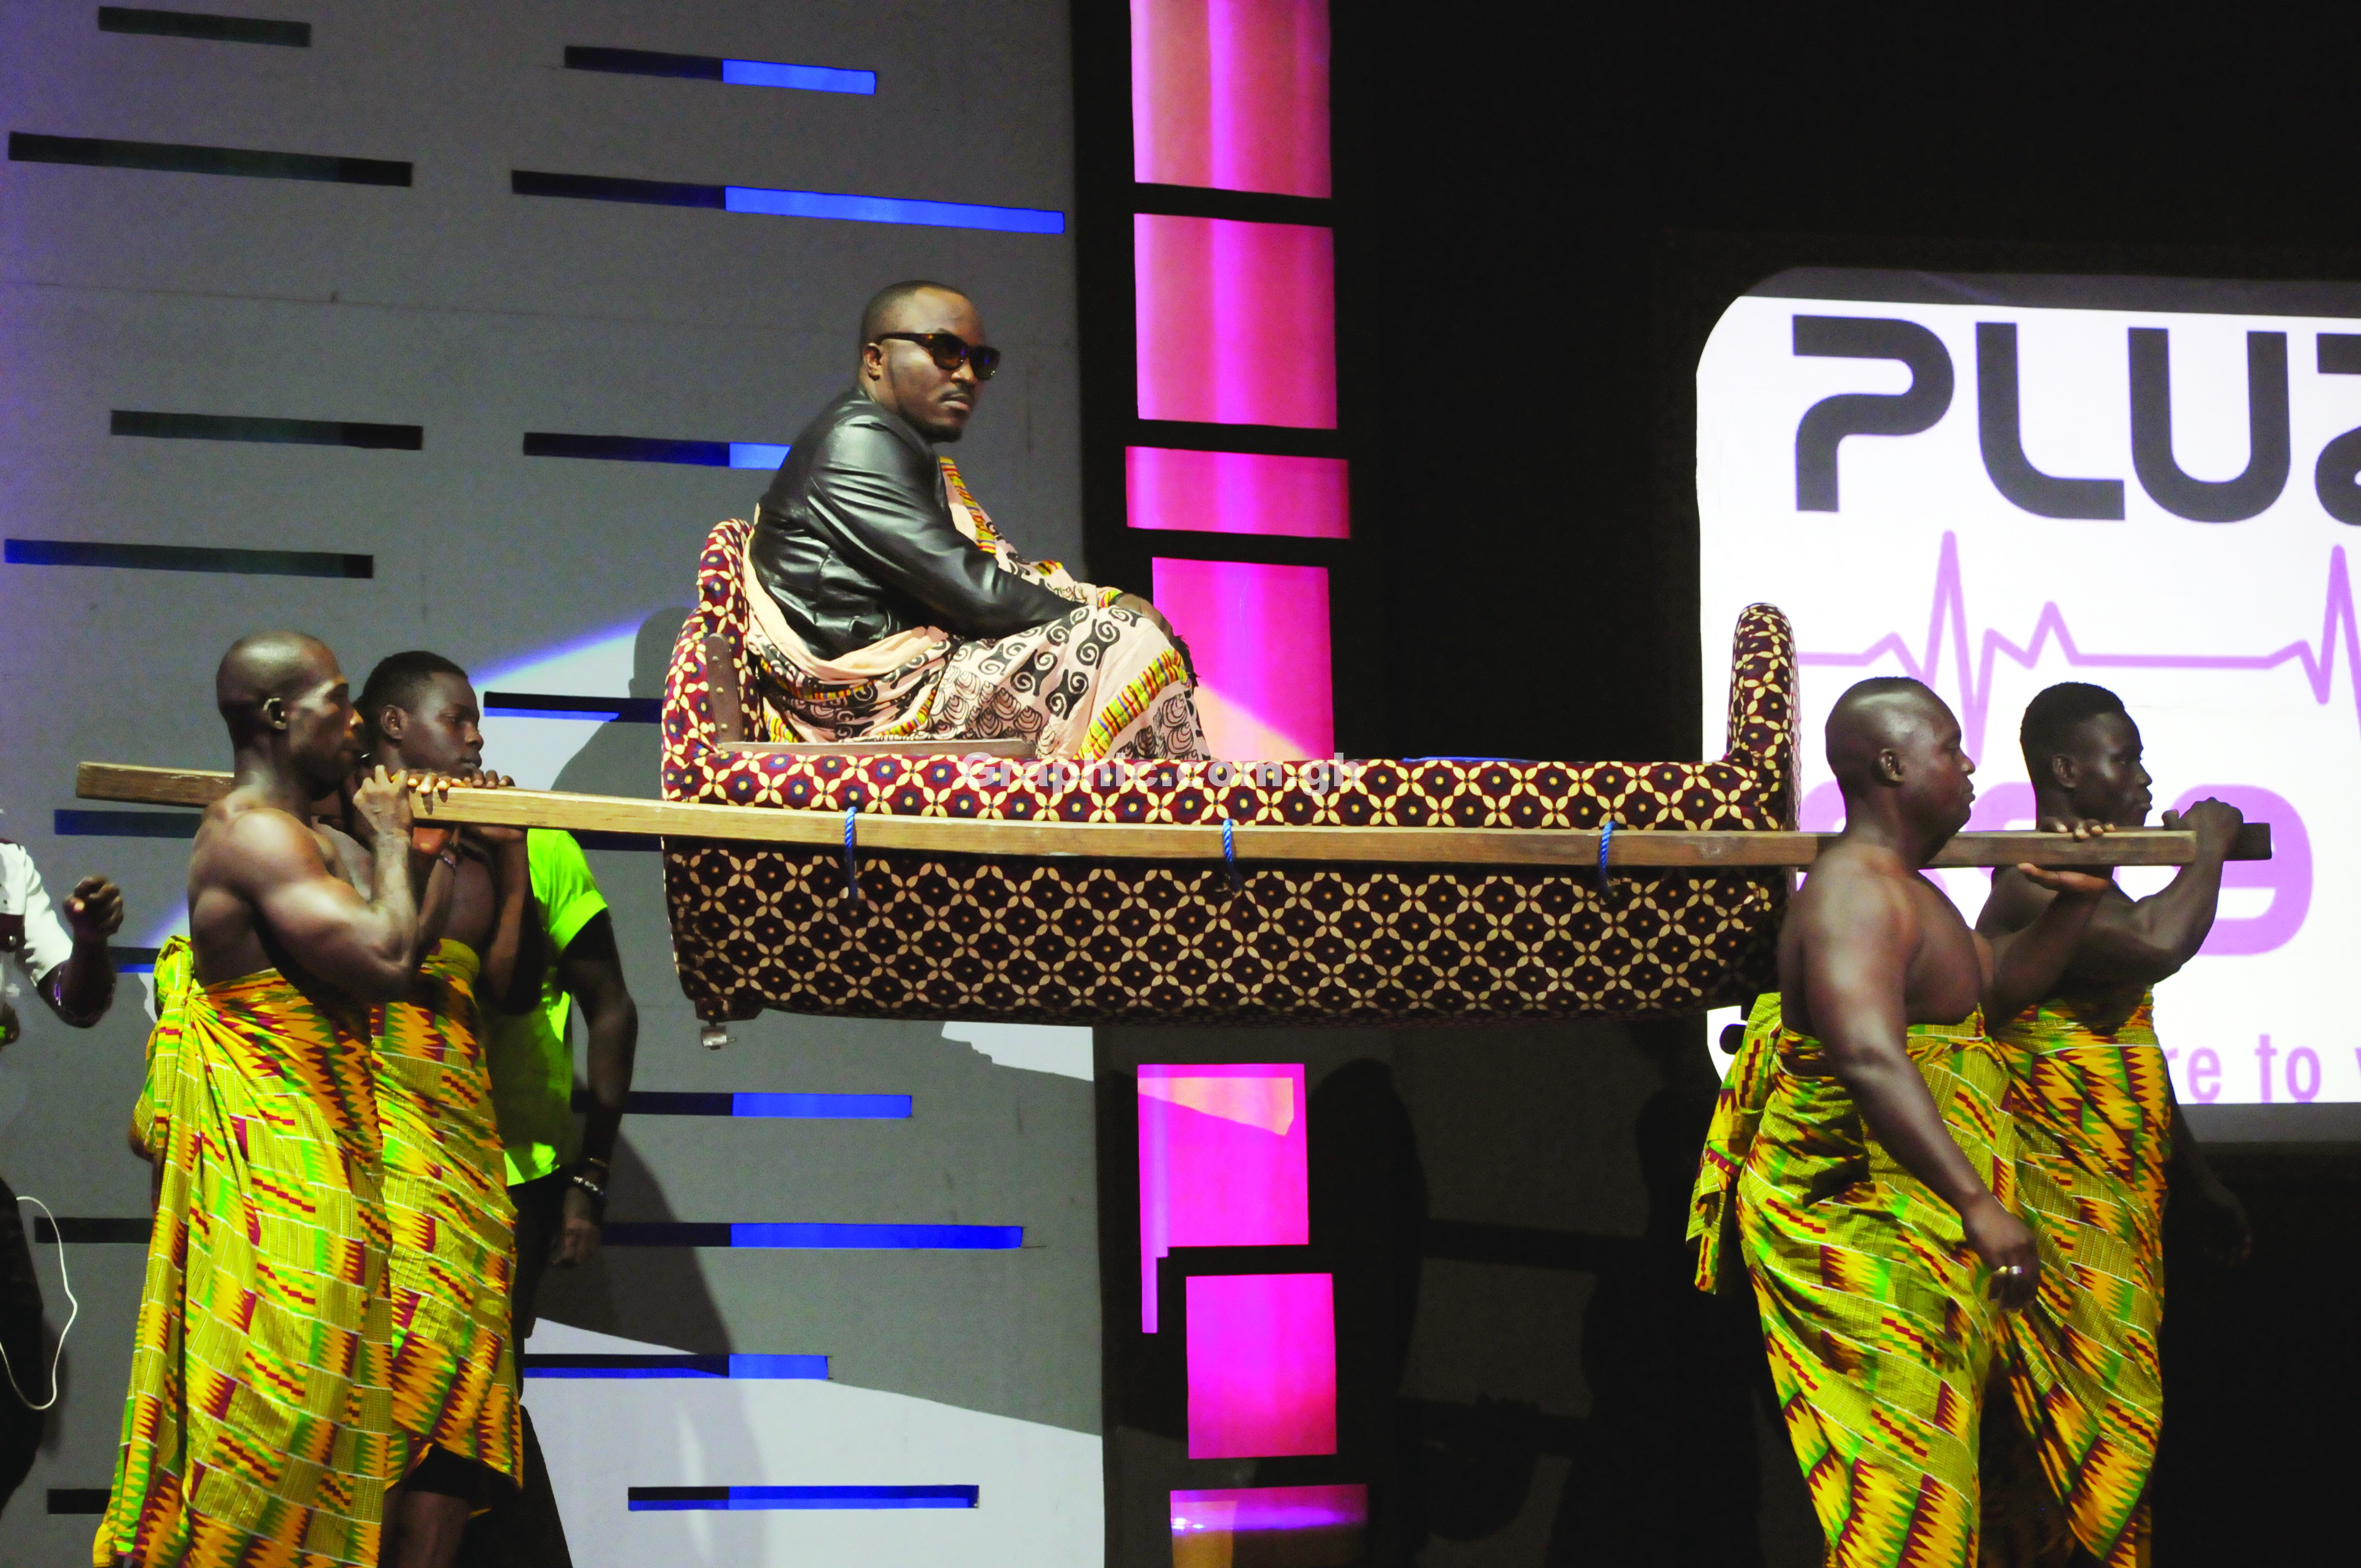 DKB arriving on stage in a palanquin